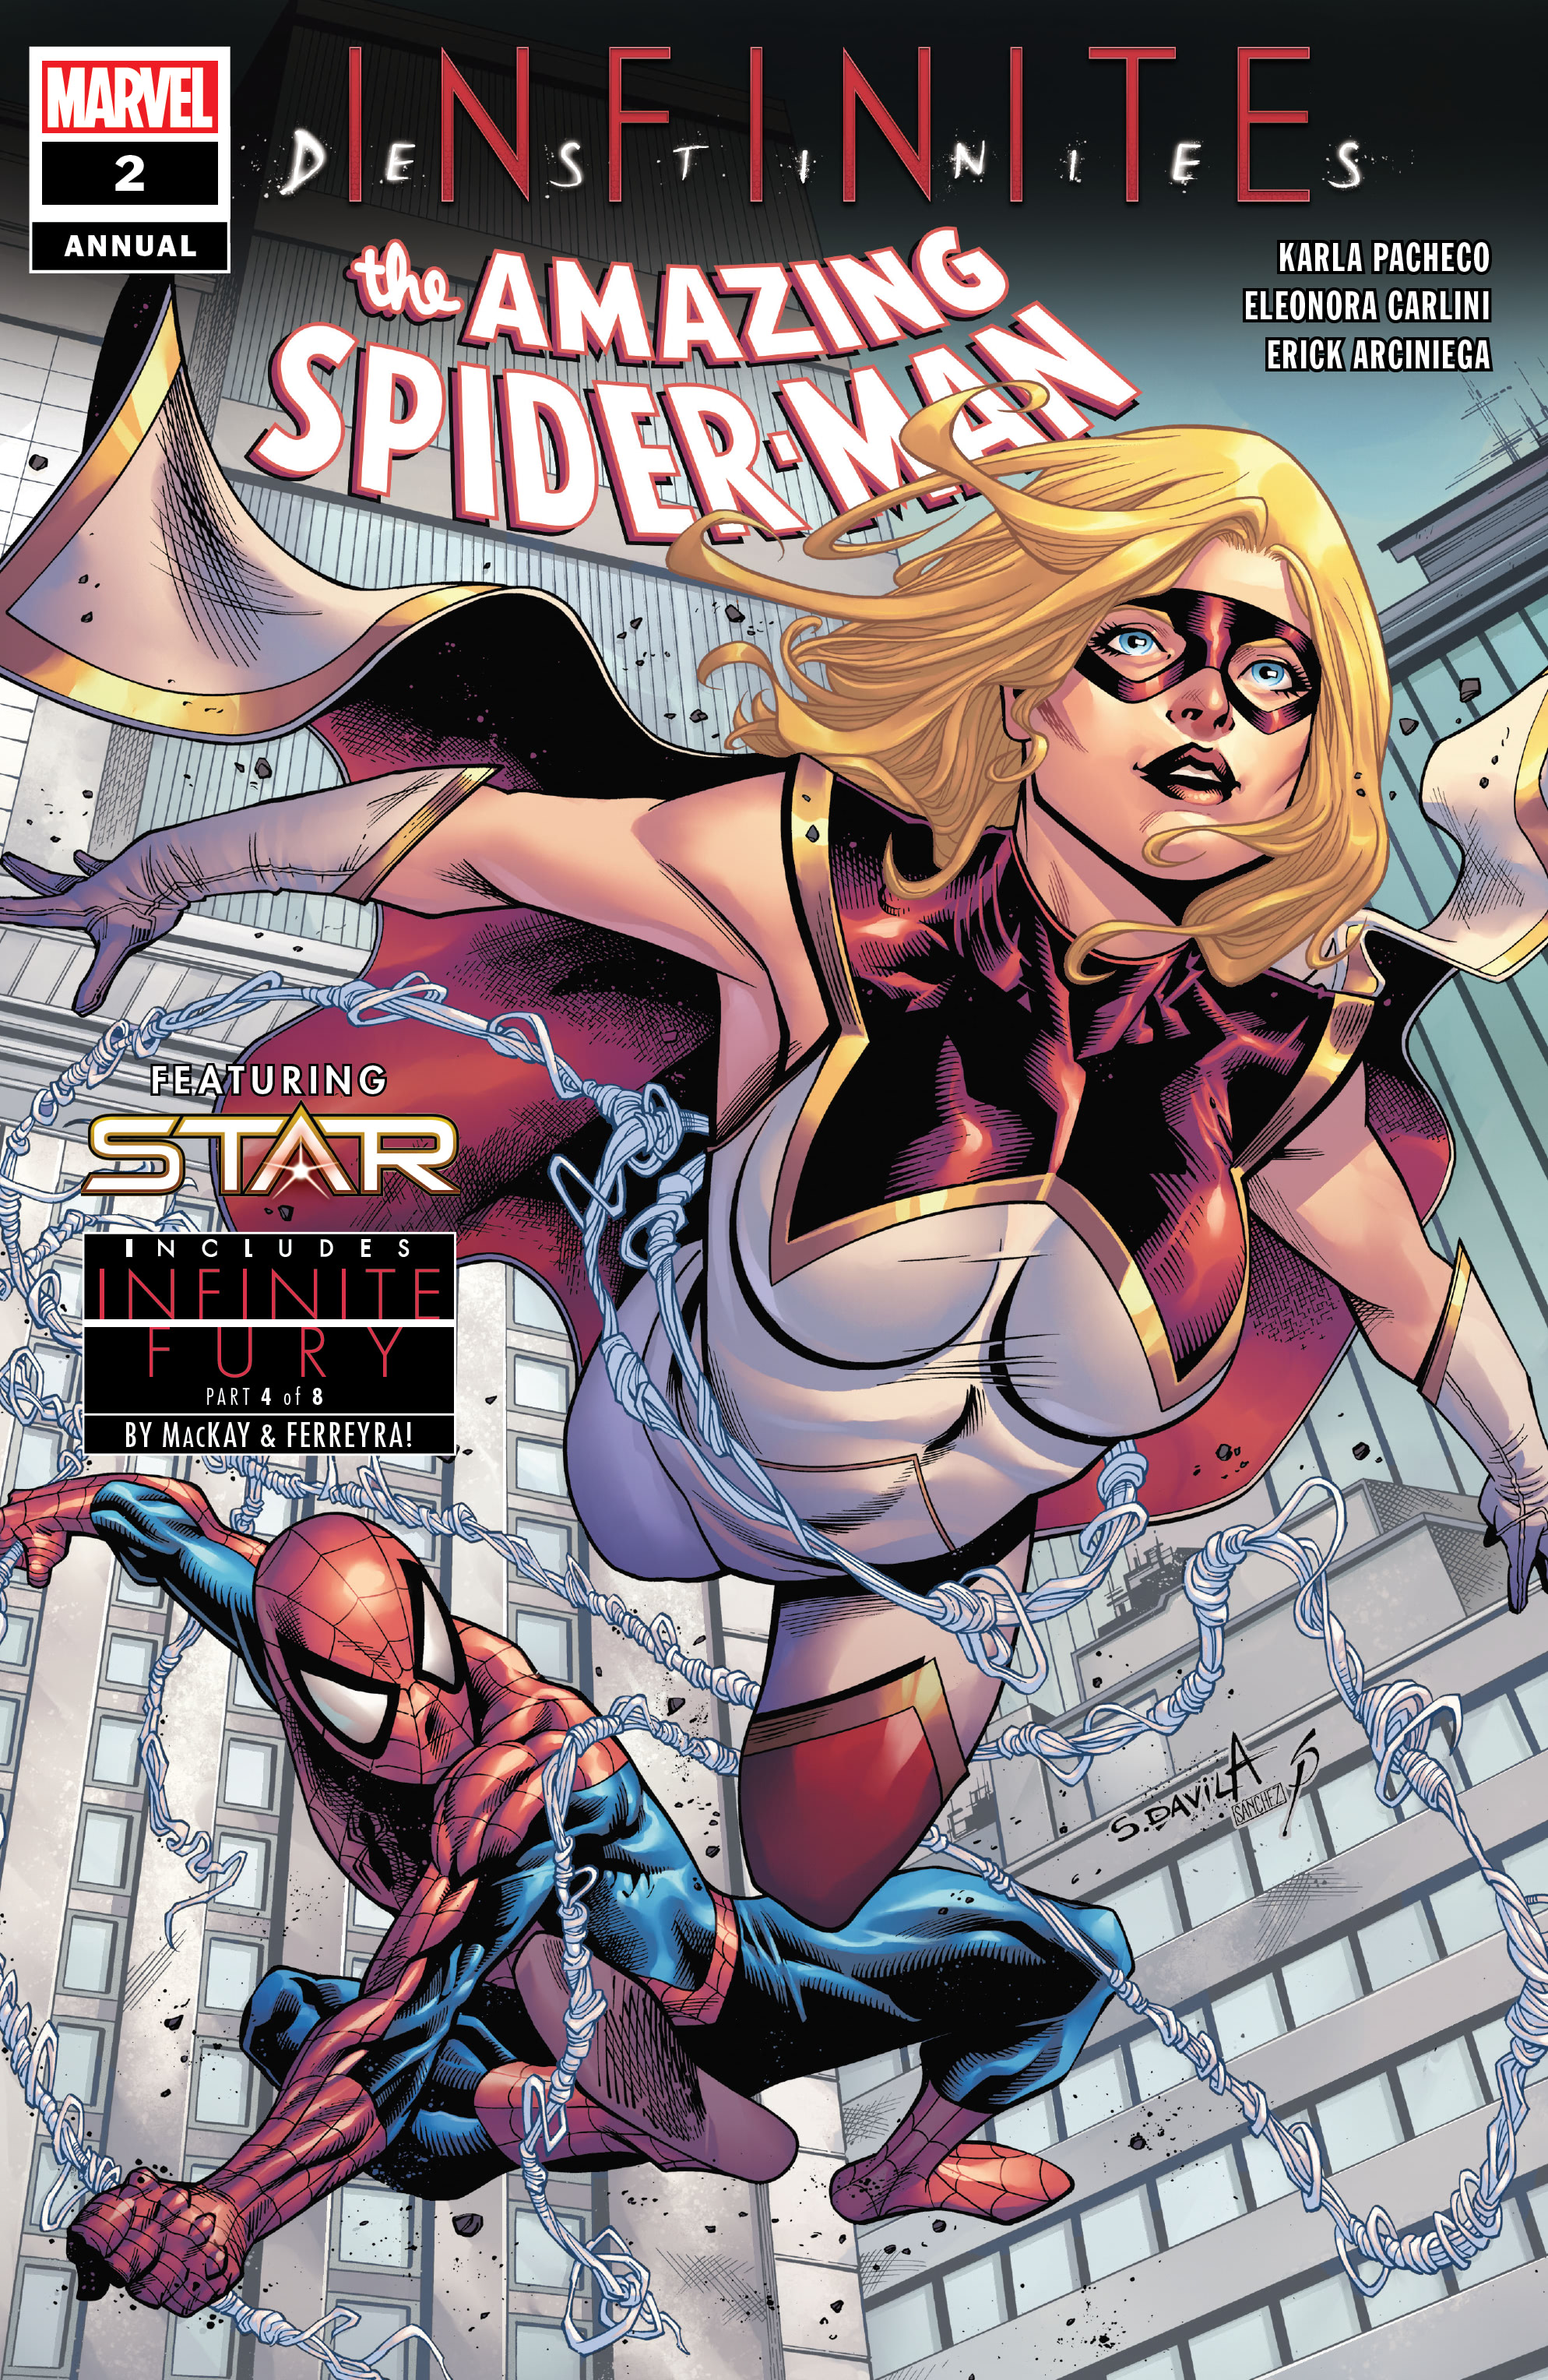 The Amazing Spider Man 2018 Annual 2 | Read The Amazing Spider Man 2018  Annual 2 comic online in high quality. Read Full Comic online for free -  Read comics online in high quality .|